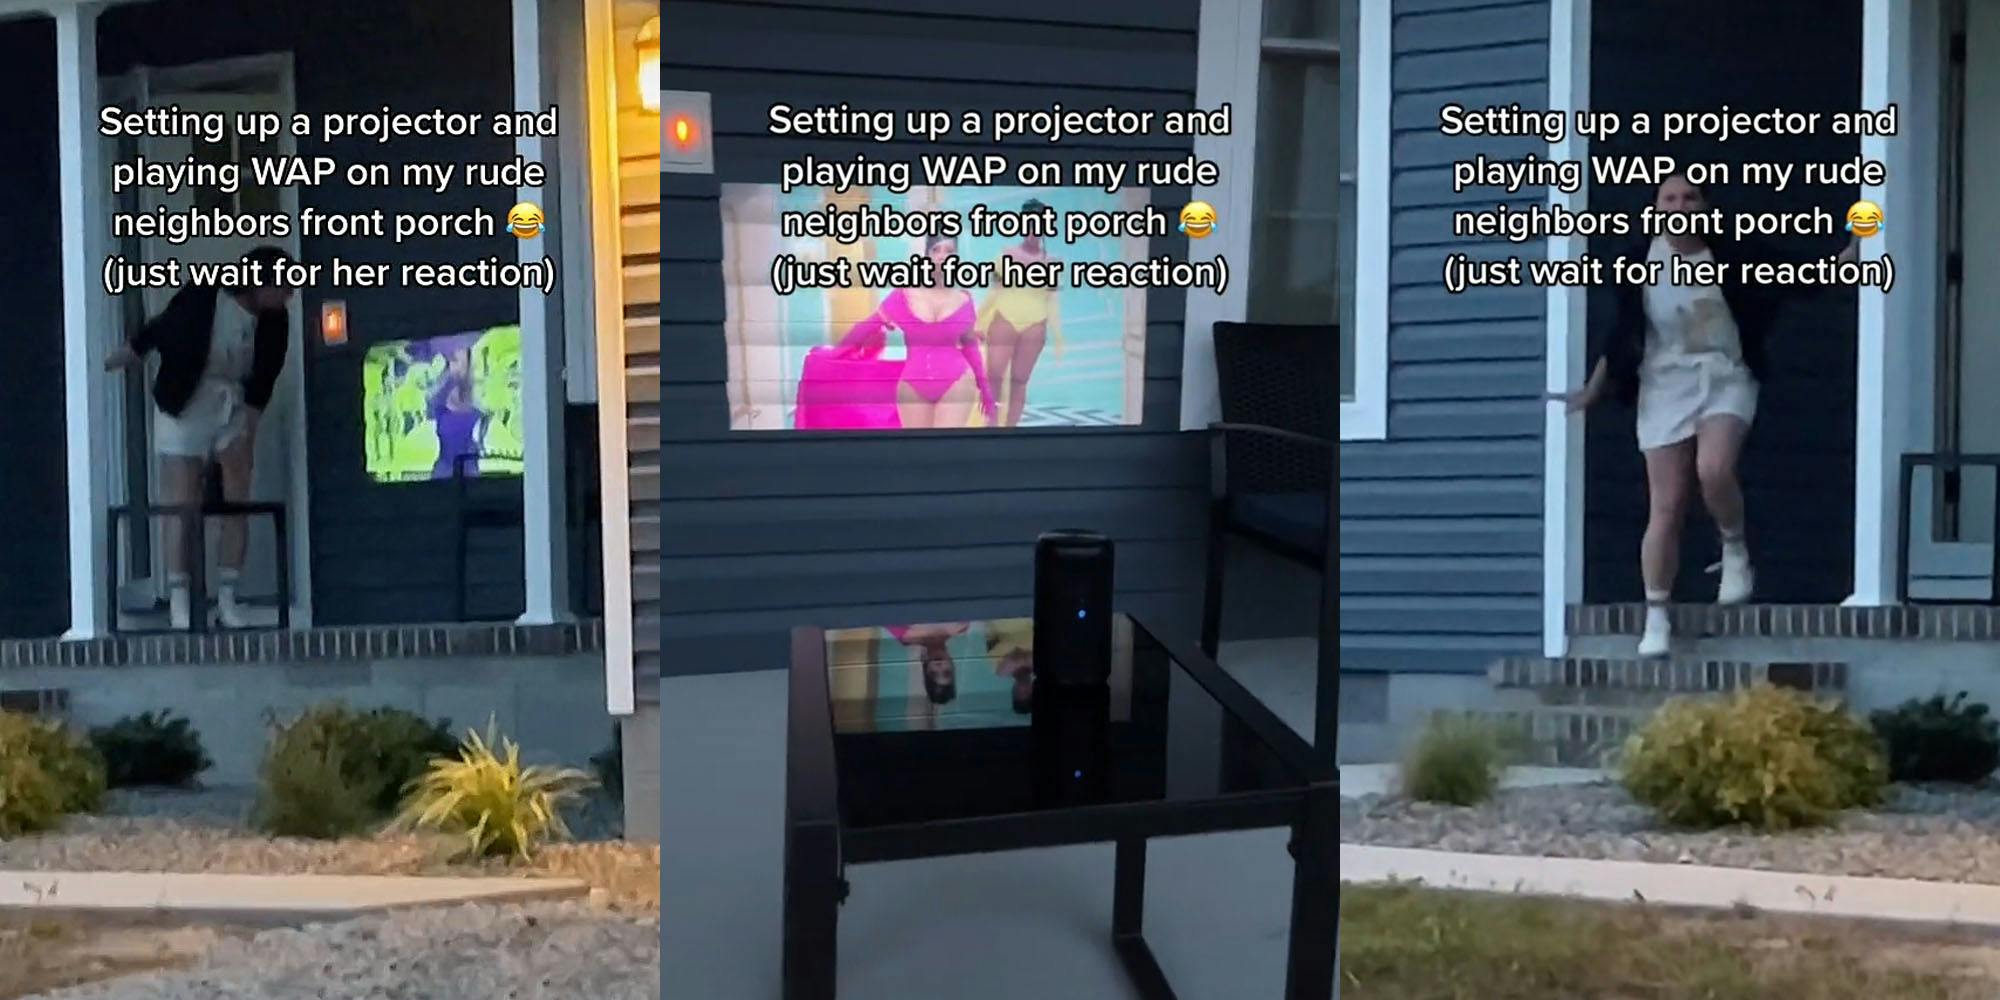 Neighbor spotting WAP projected on house caption "Setting up a projector and playing WAP on my rude neighbors front porch (just wait for her reaction)" (l) Neighbor's porch with Cardi B WAP projected on wall table with projector set up caption "Setting up a projector and playing WAP on my rude neighbors front porch (just wait for her reaction)" (c) Neighbor coming down steps angry caption "Setting up a projector and playing WAP on my rude neighbors front porch (just wait for her reaction)" (r)